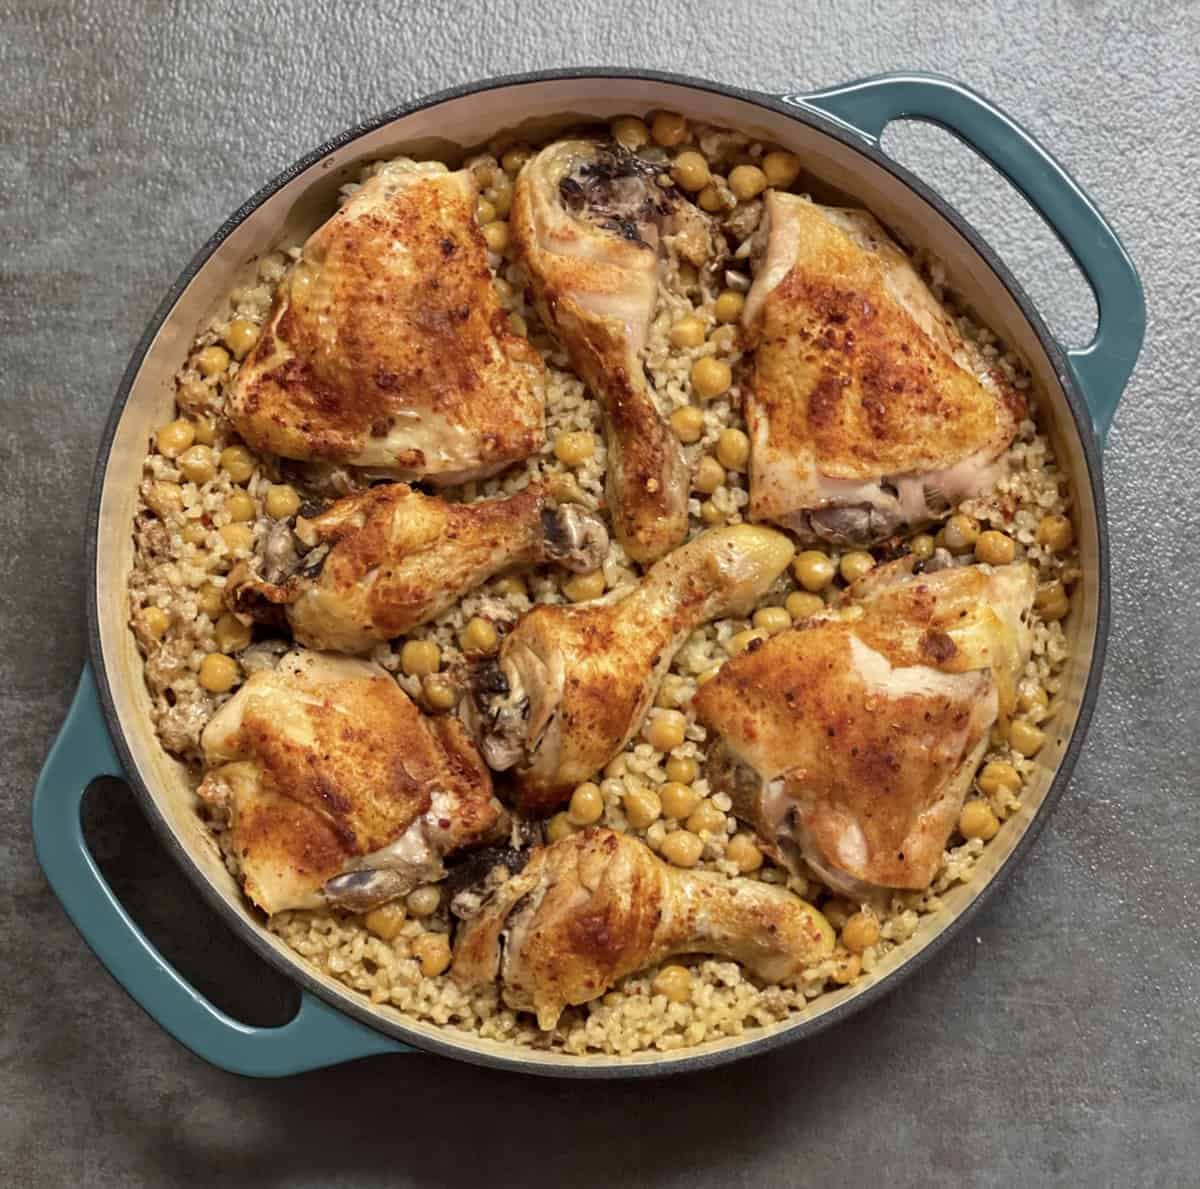 Easy One-Pan, No-Fail Chicken and Rice Supper